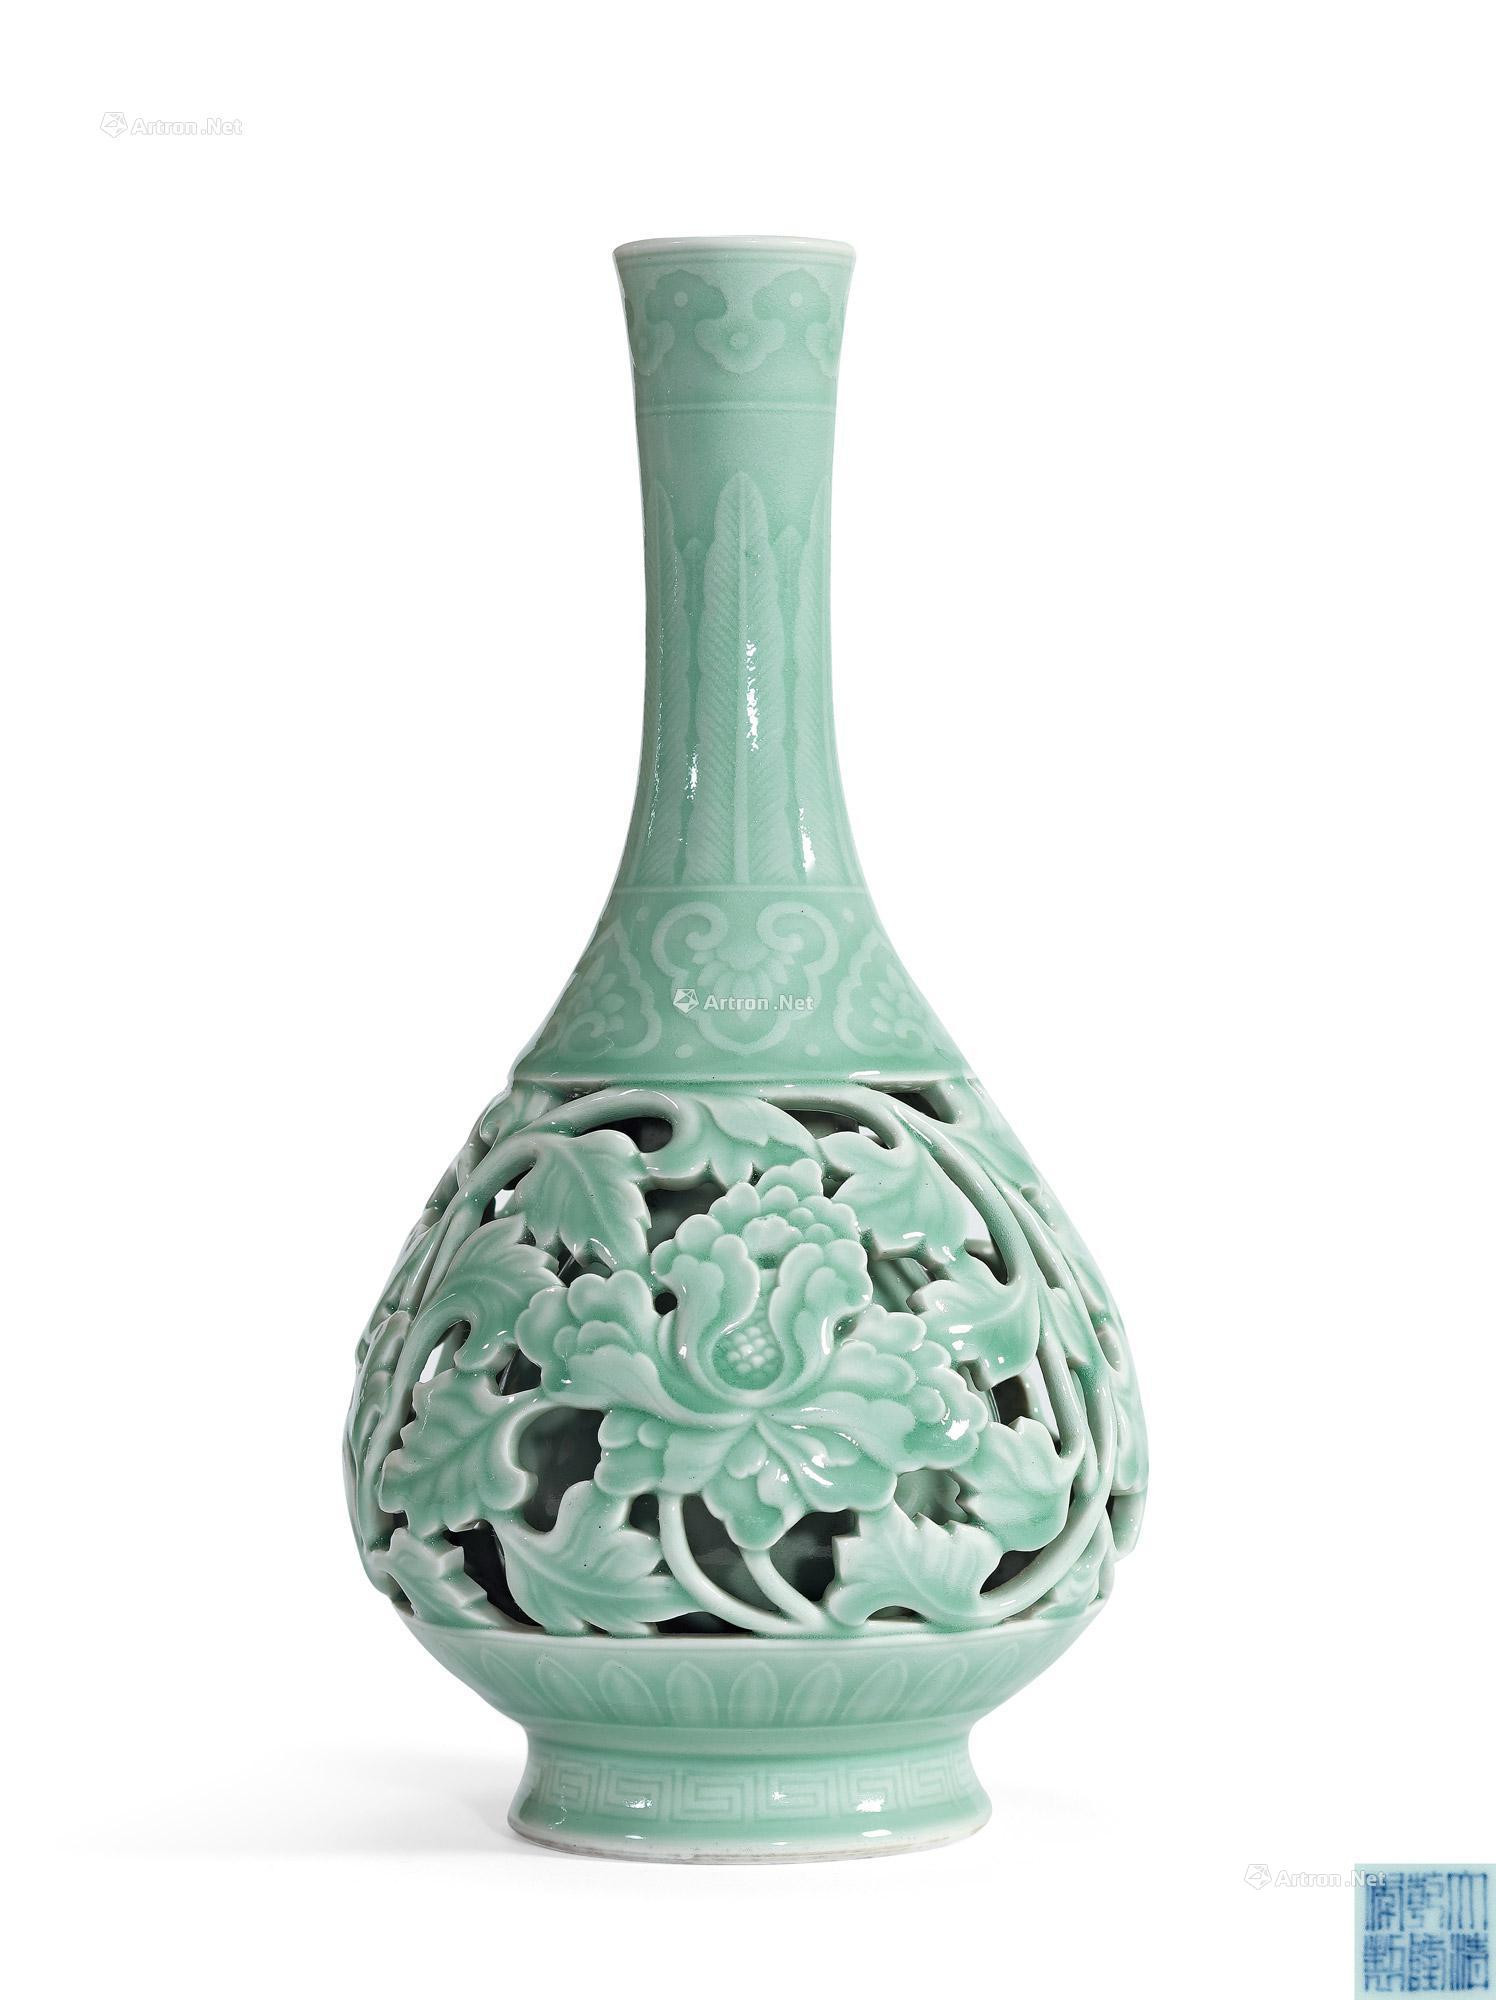 AN EXTREMELY RARE IMPERIAL CELADON-GLAZED RETICULATED PEAR SHAPED ‘PEONY’ VASE